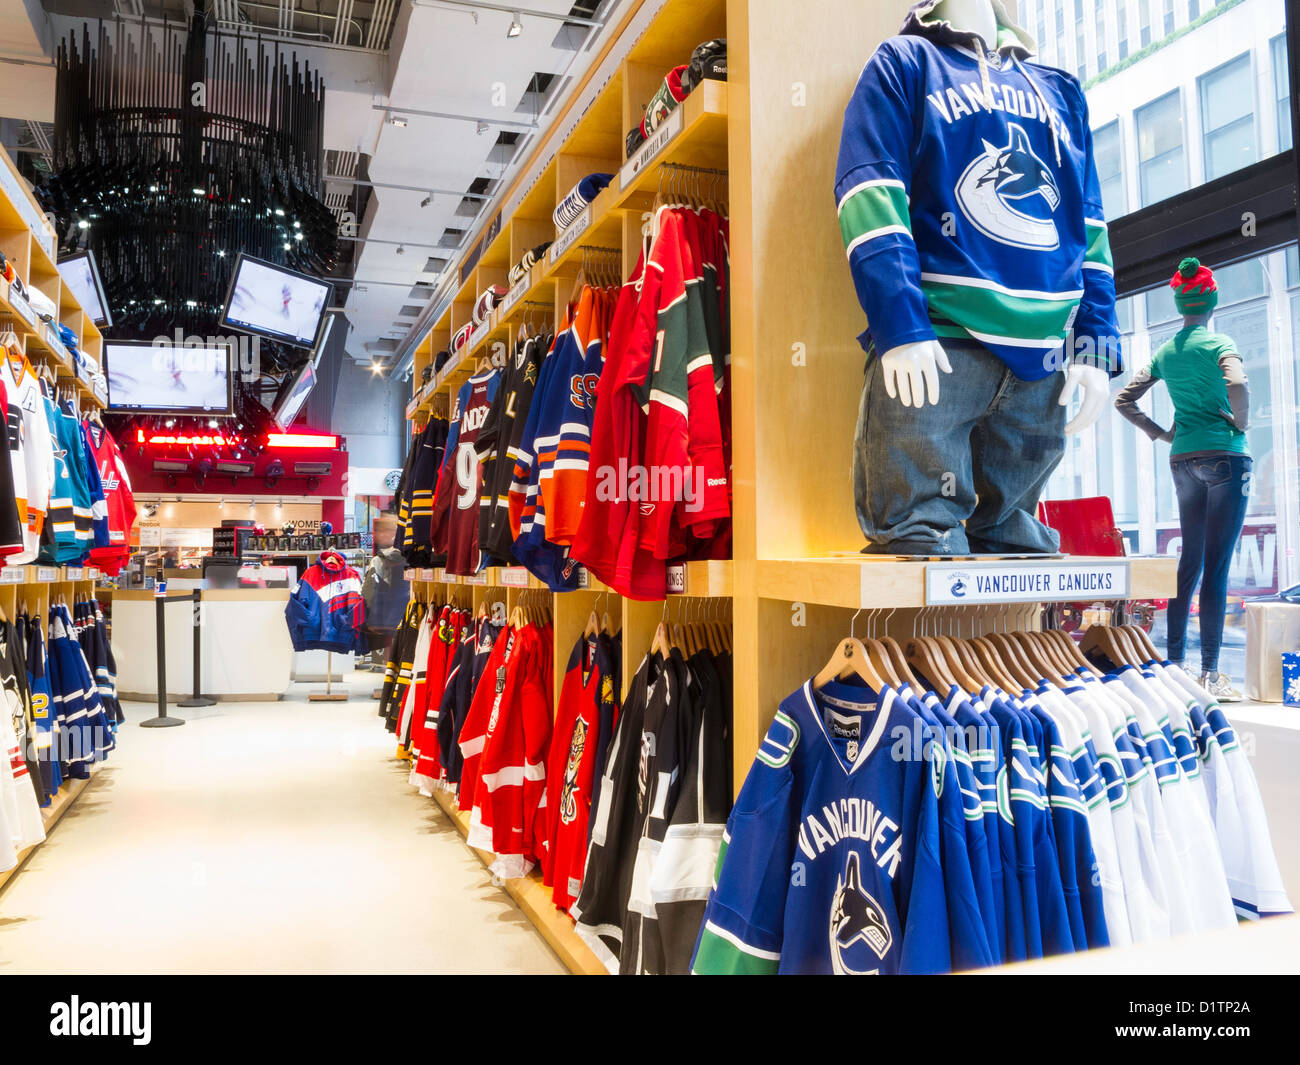 NHL Store Powered by Reebok